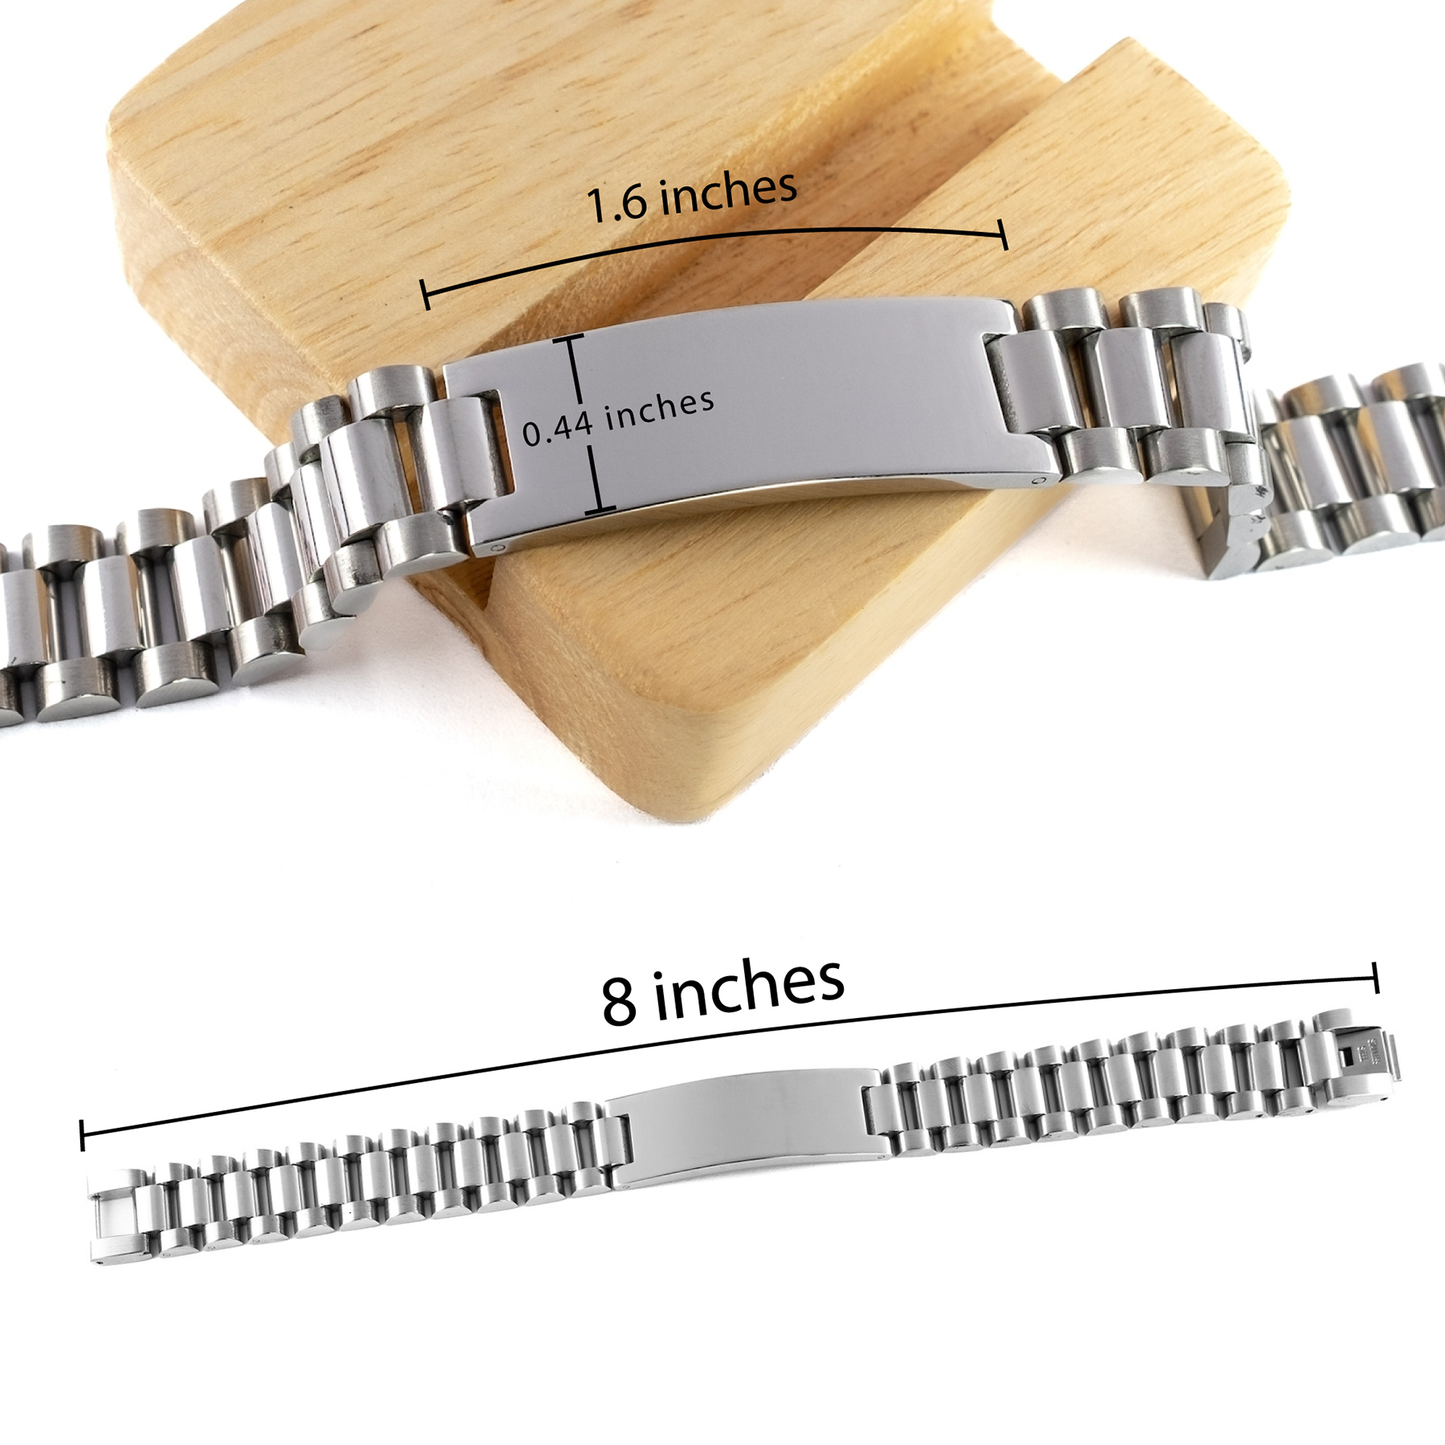 To My Sister Thank You Gifts, You are appreciated more than you know, Appreciation Ladder Stainless Steel Bracelet for Sister, Birthday Unique Gifts for Sister